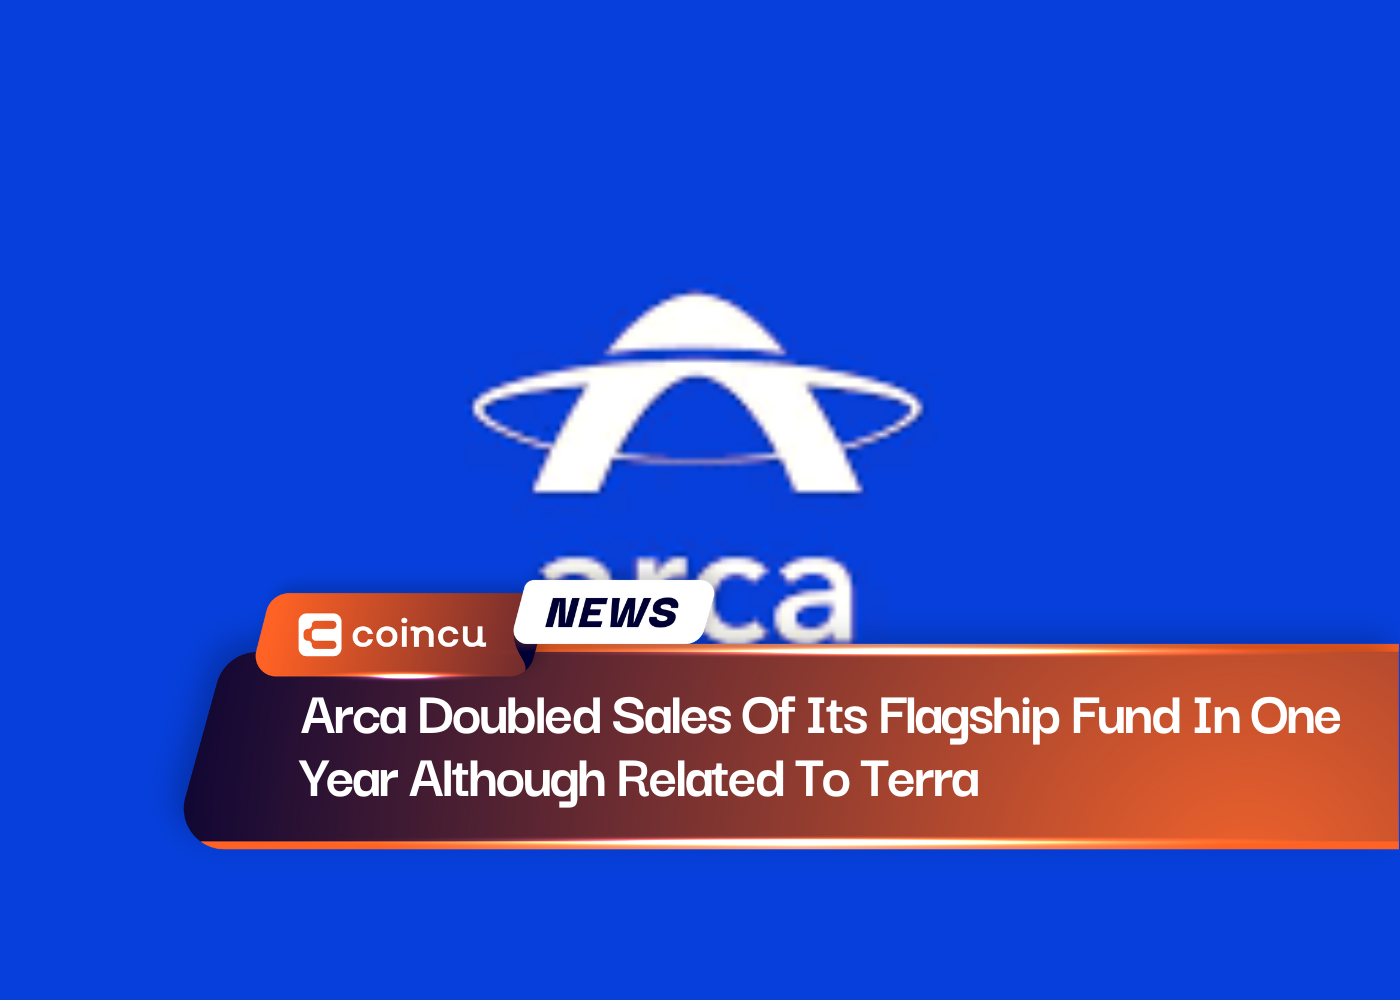 Arca Doubled Sales Of Its Flagship Fund In One Year Although Related To Terra